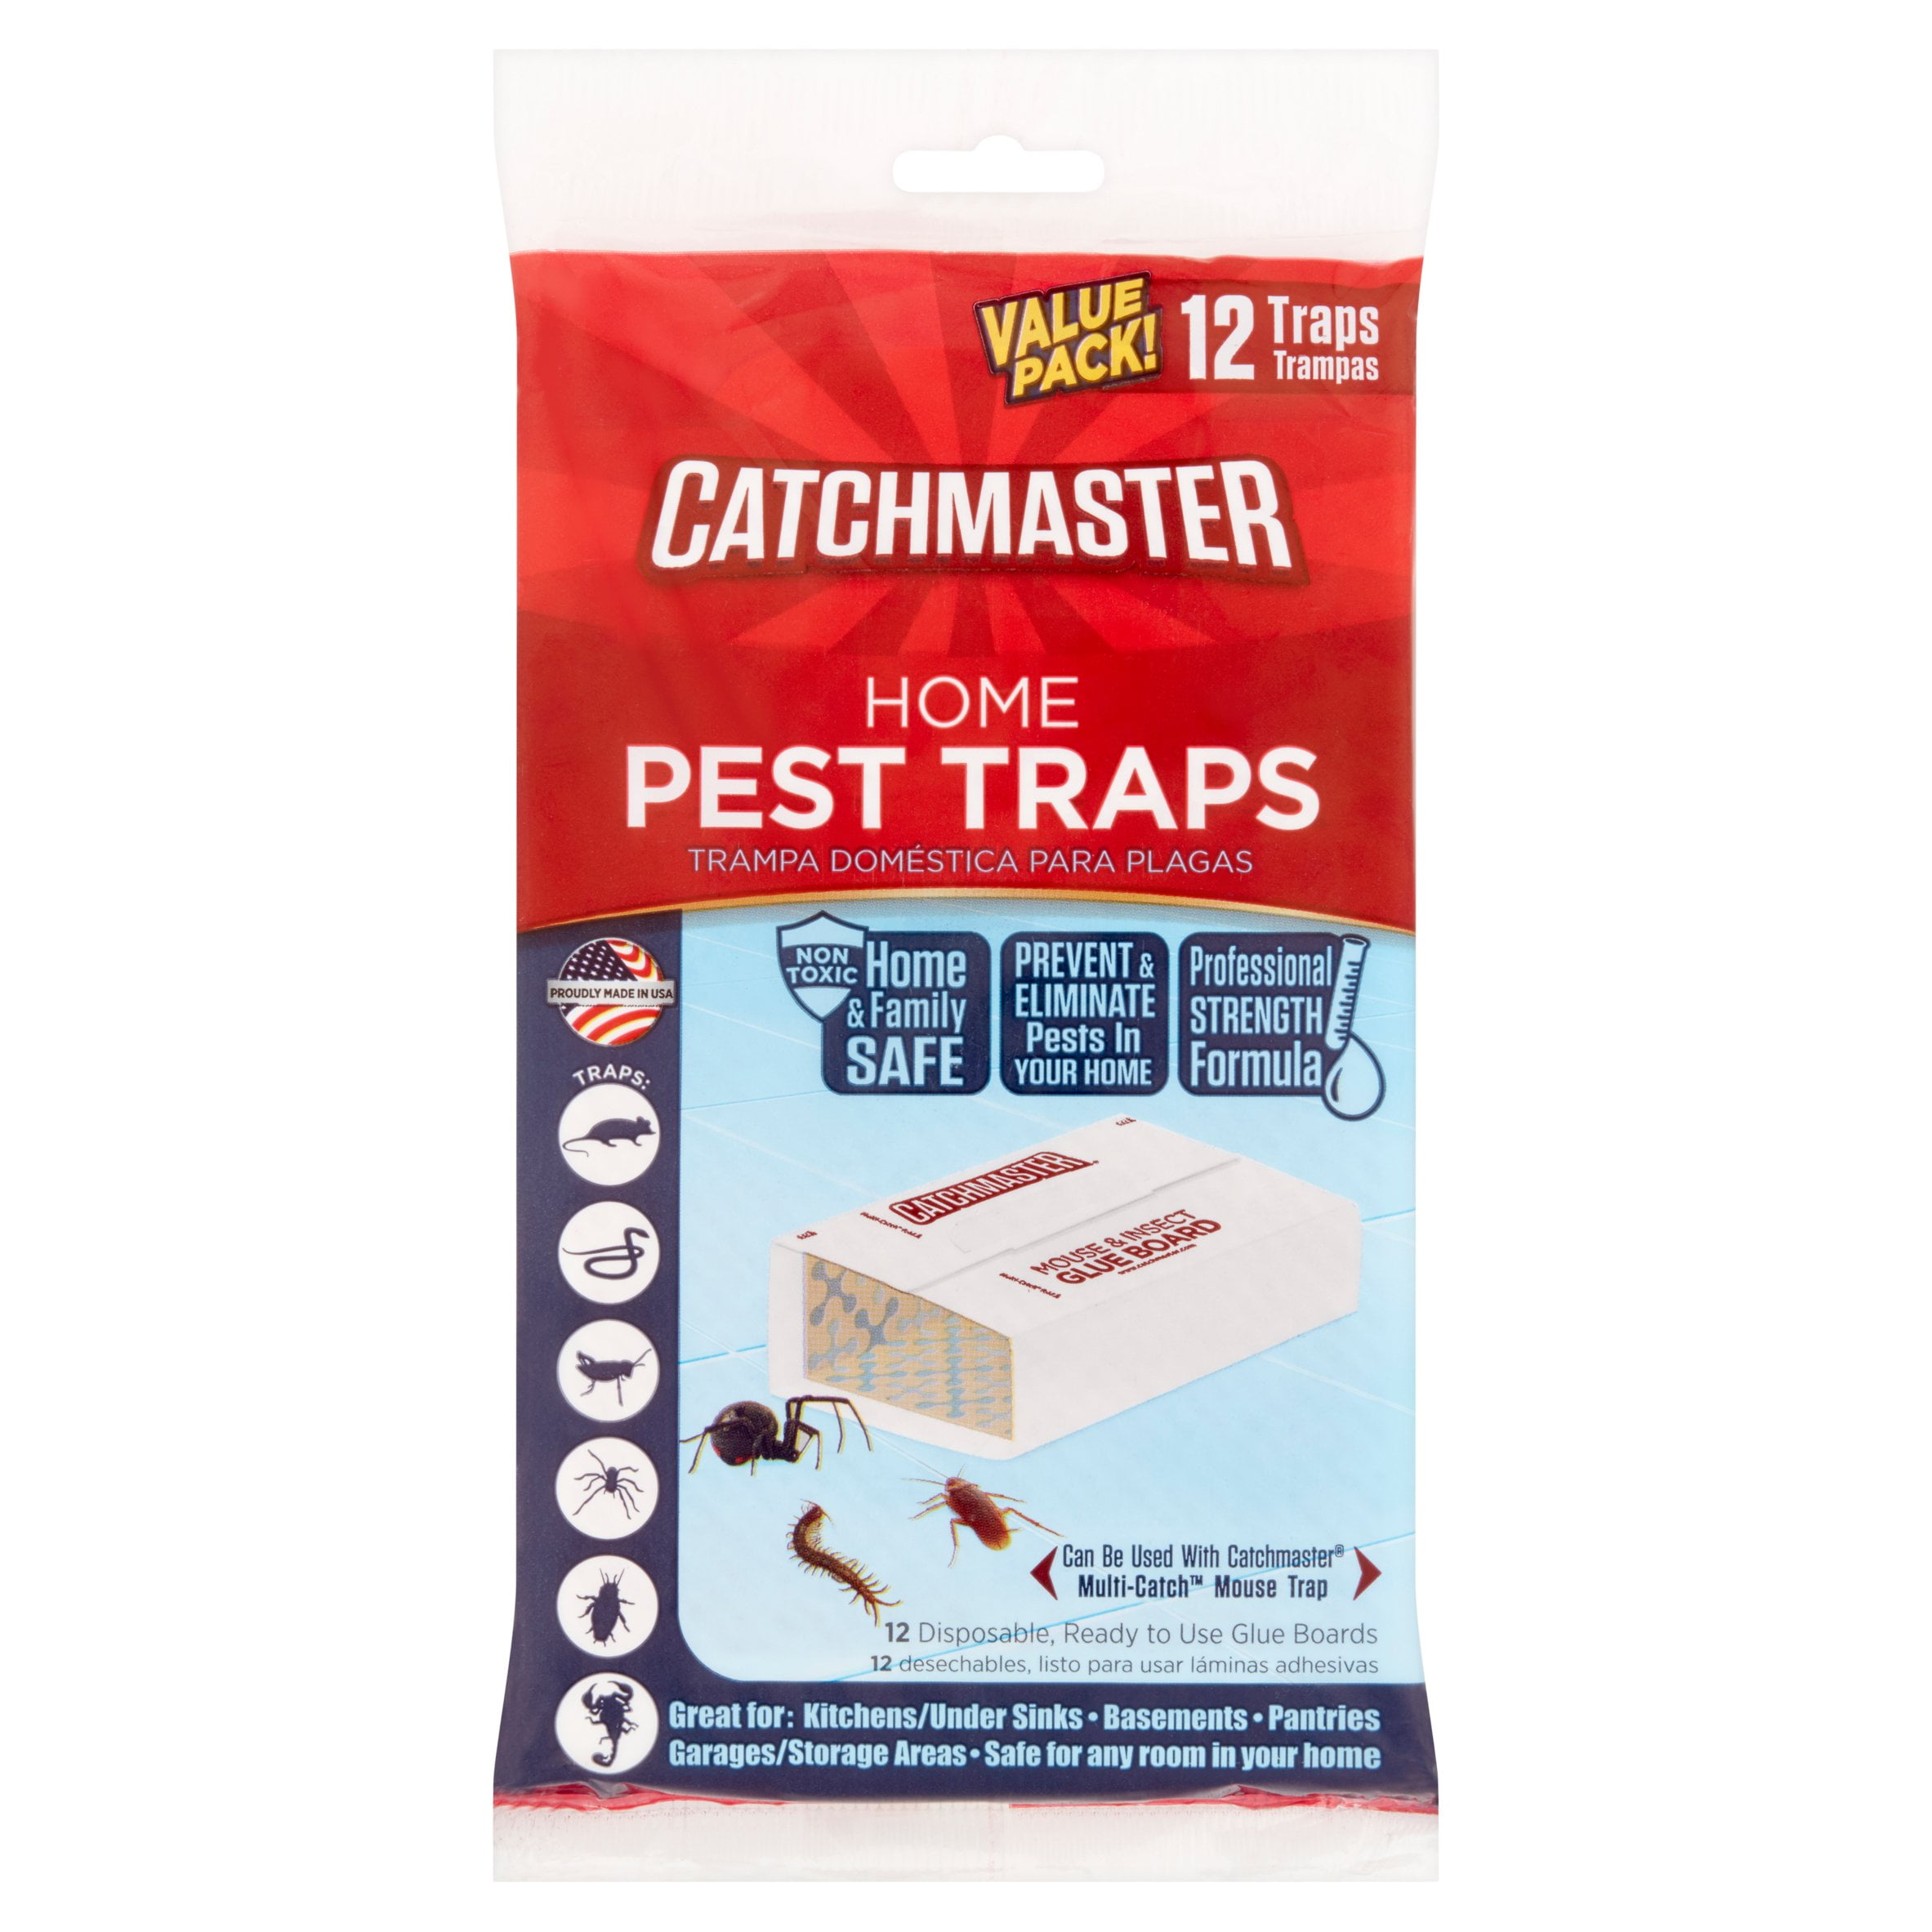 Catchmaster Value Pack Home Pest Traps 12 Count - Scented to attract pests - Economical & Easy to Use